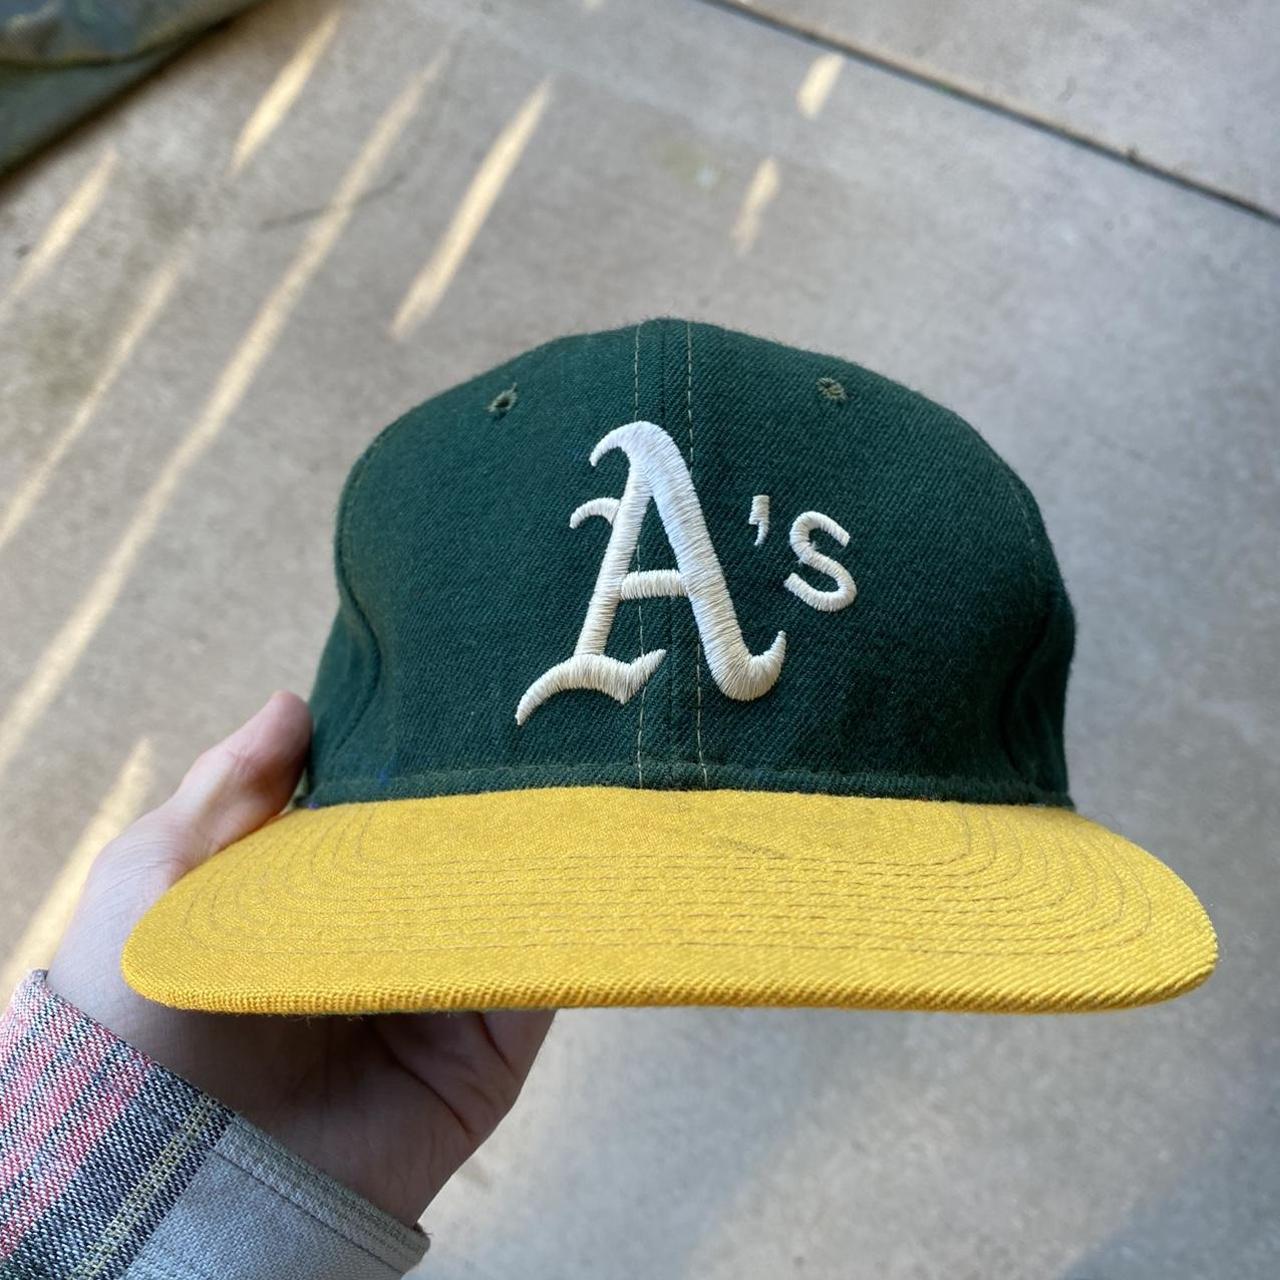 Vintage Oakland Athletics Sports Specialties Fitted Hat Cap 